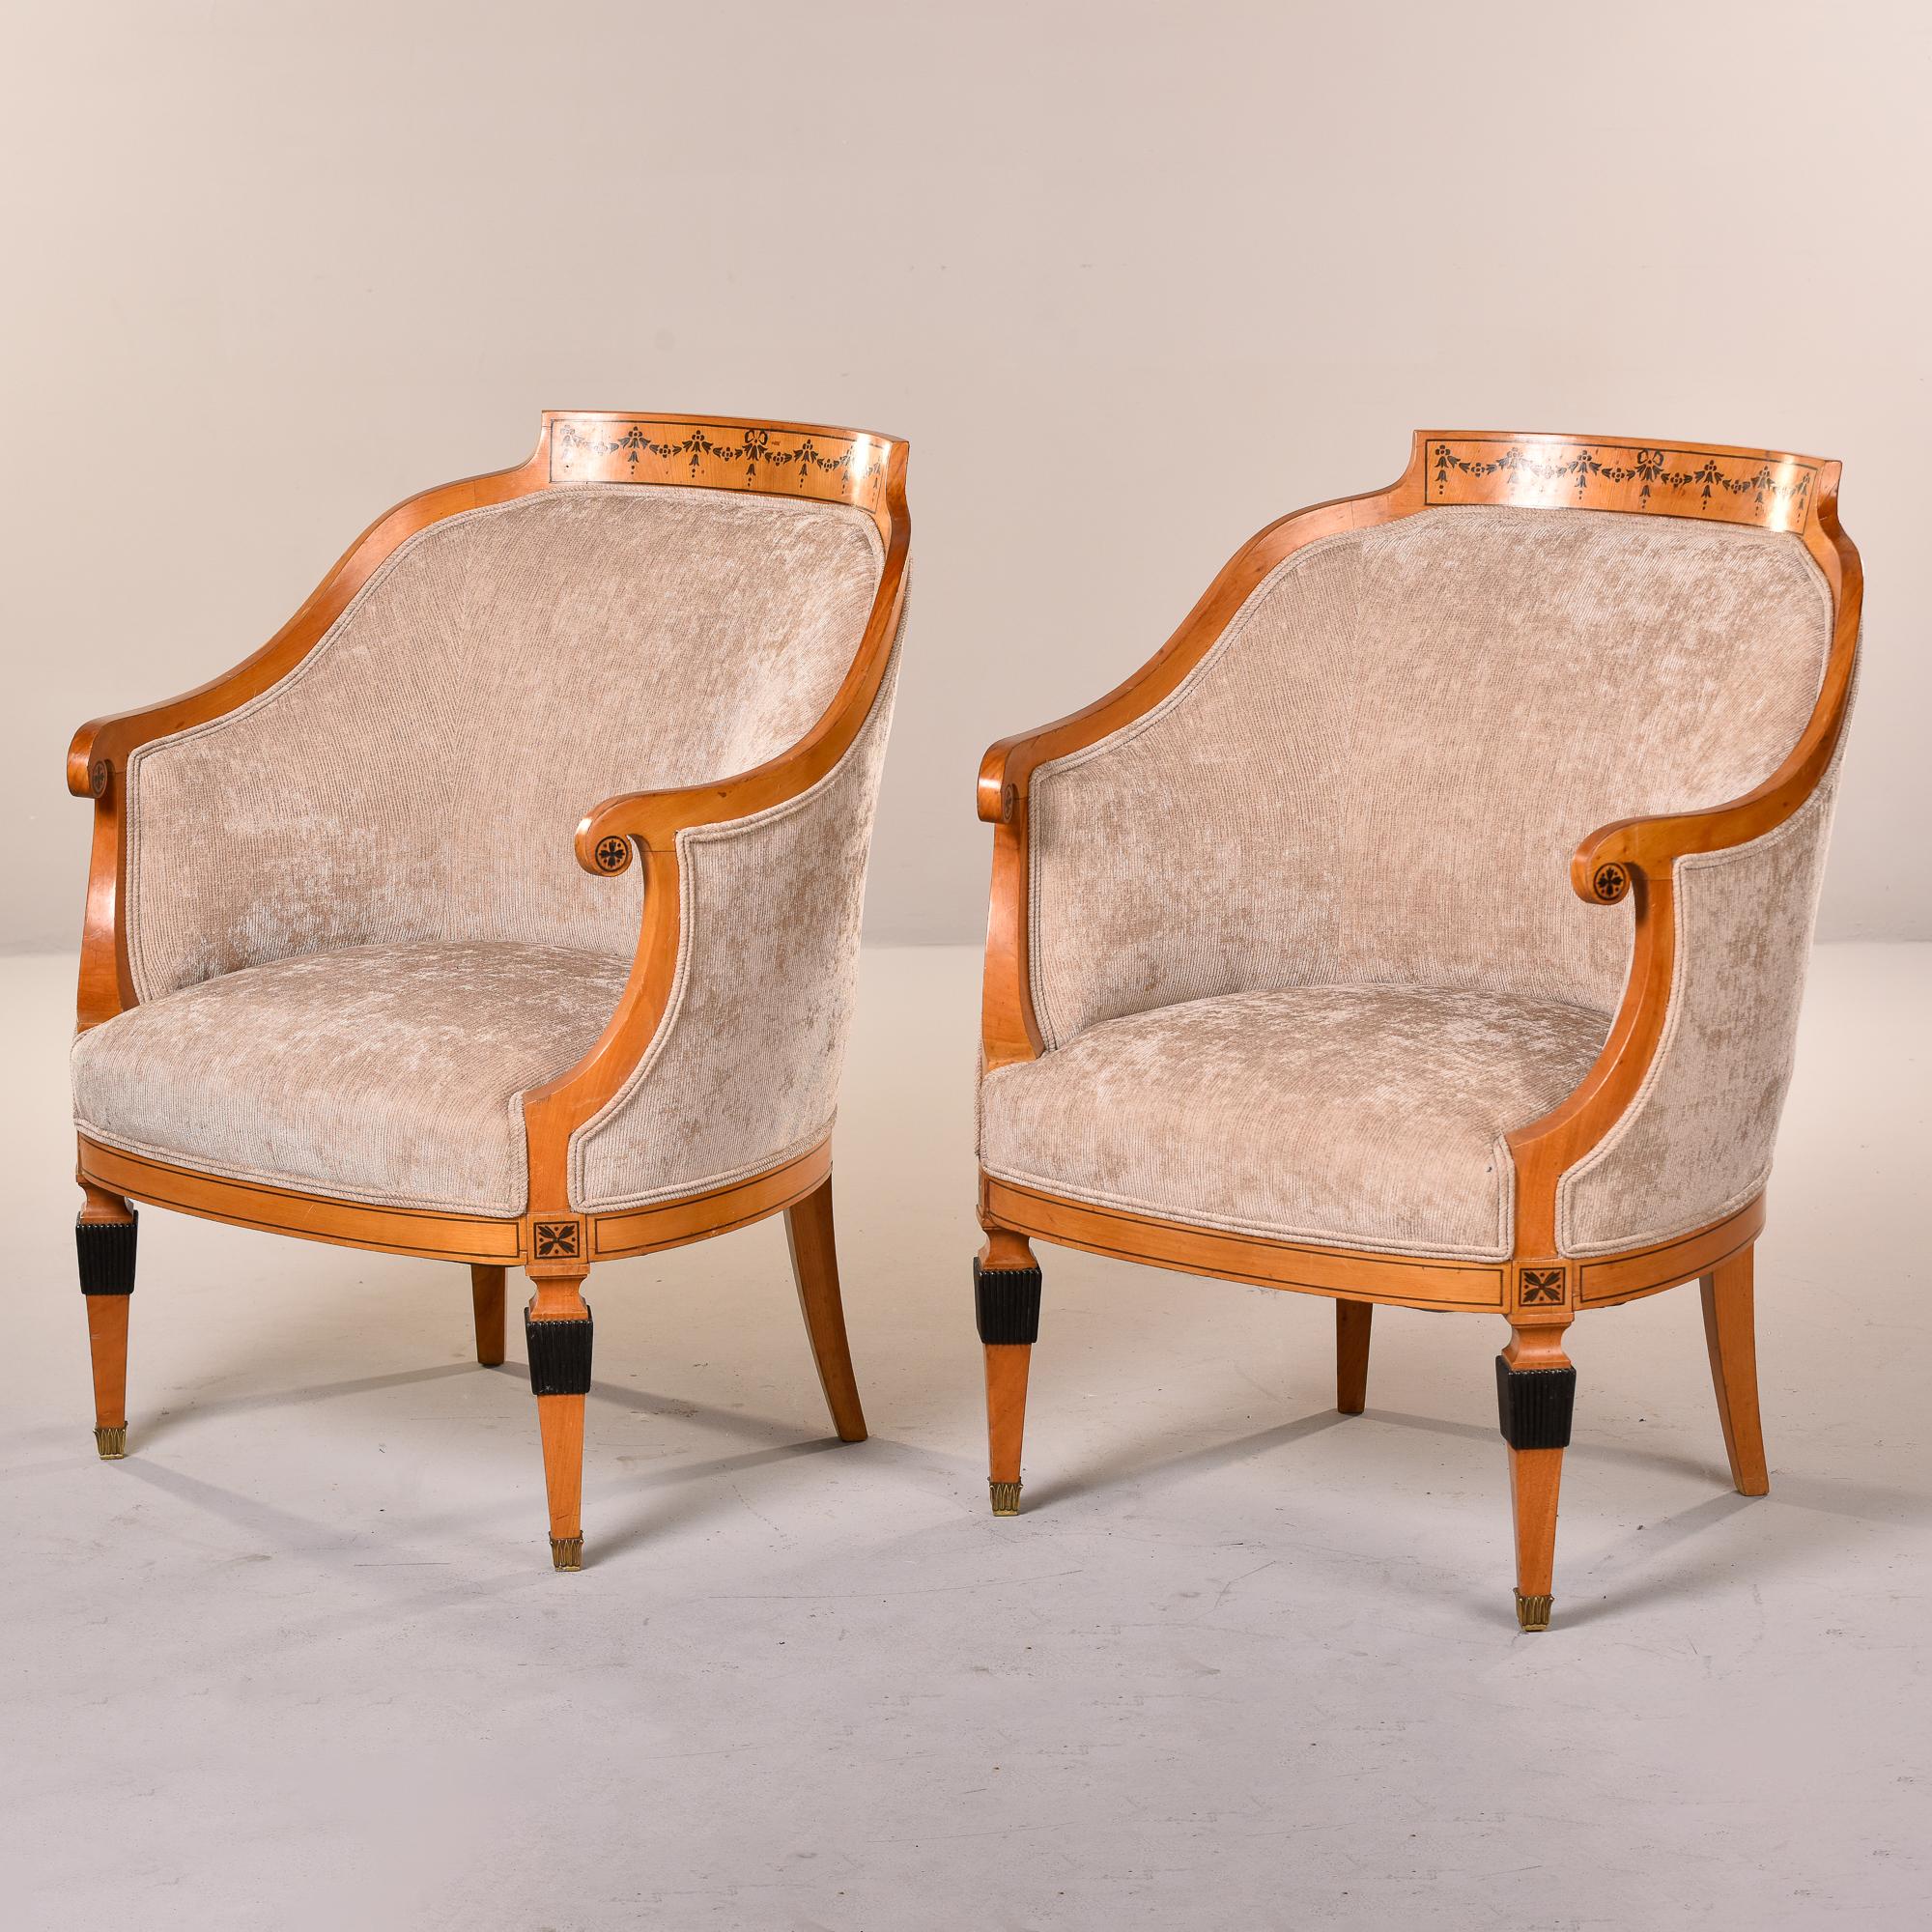 Found in France, this pair of circa 1930s Bergere chairs have light wood frames with curved seat backs and curved arms. Frames have painted floral details on top of seat backs, outside of arms and painted medallions at top of front legs. Front legs